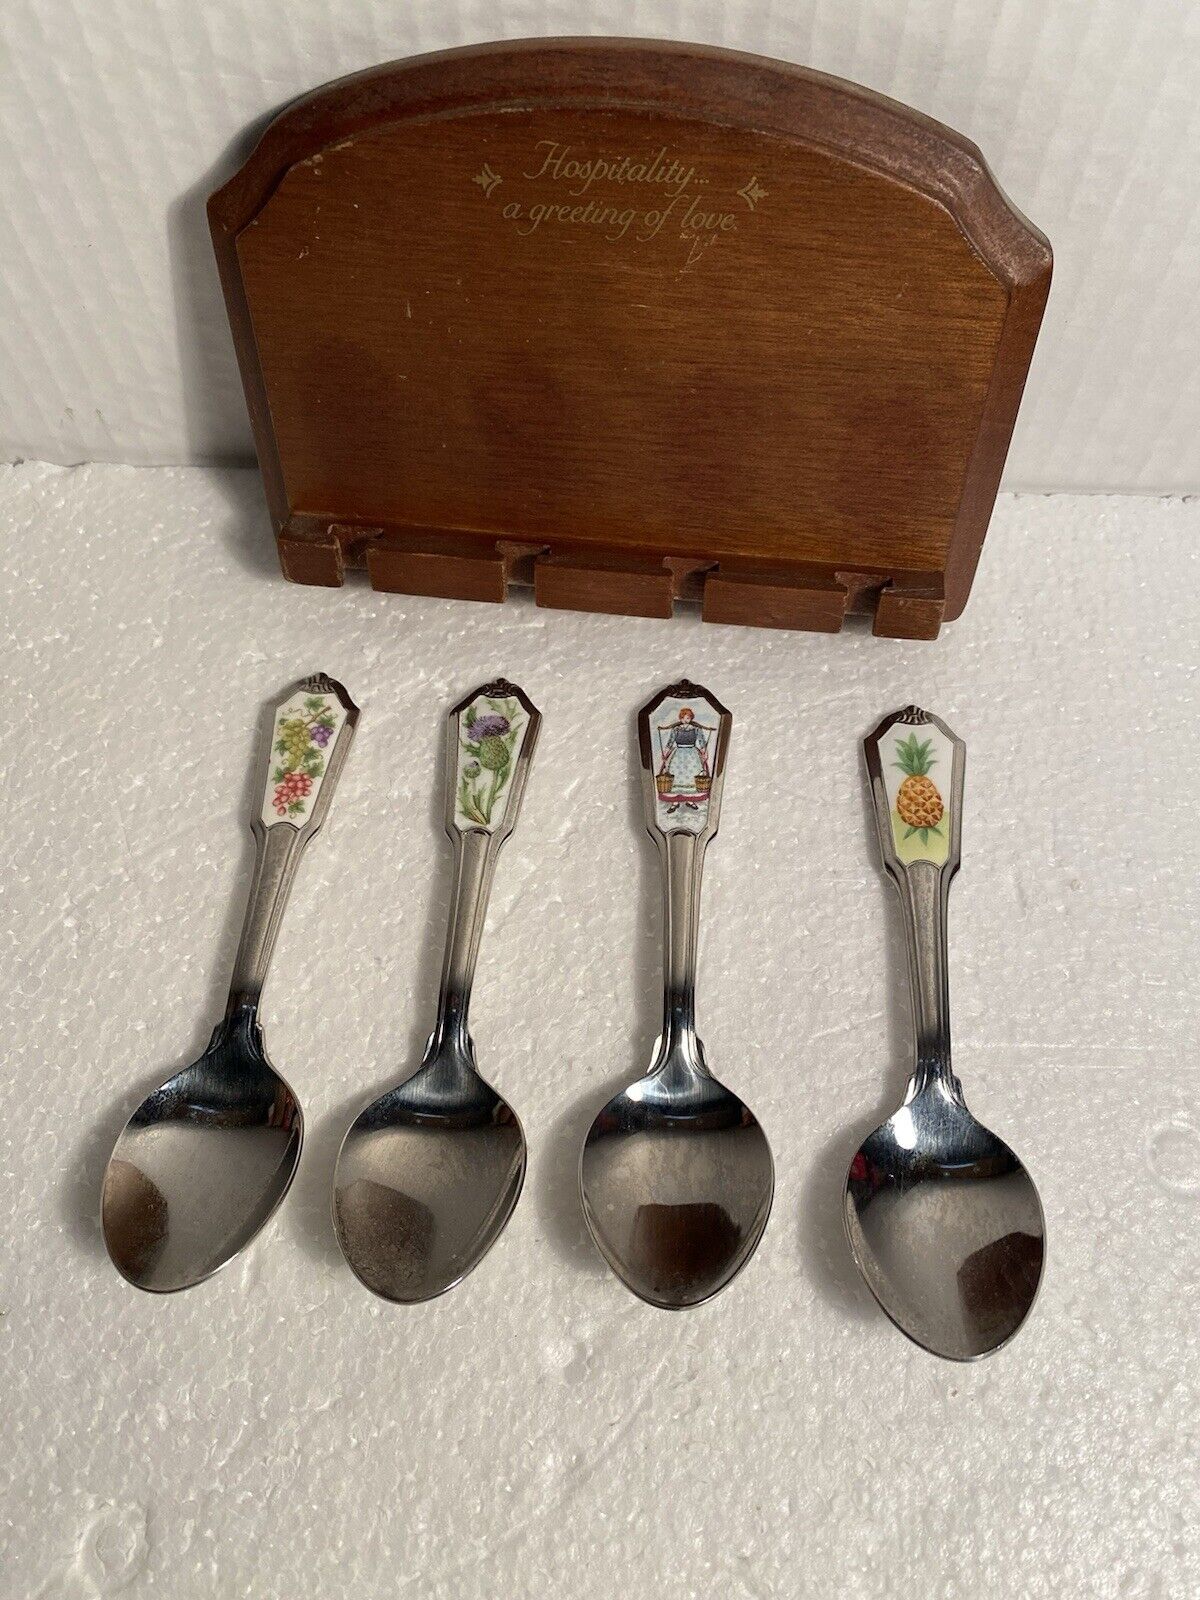 Vintage Avon 1985 Hospitality Spoon Series Set of 4 with Wall Hanger